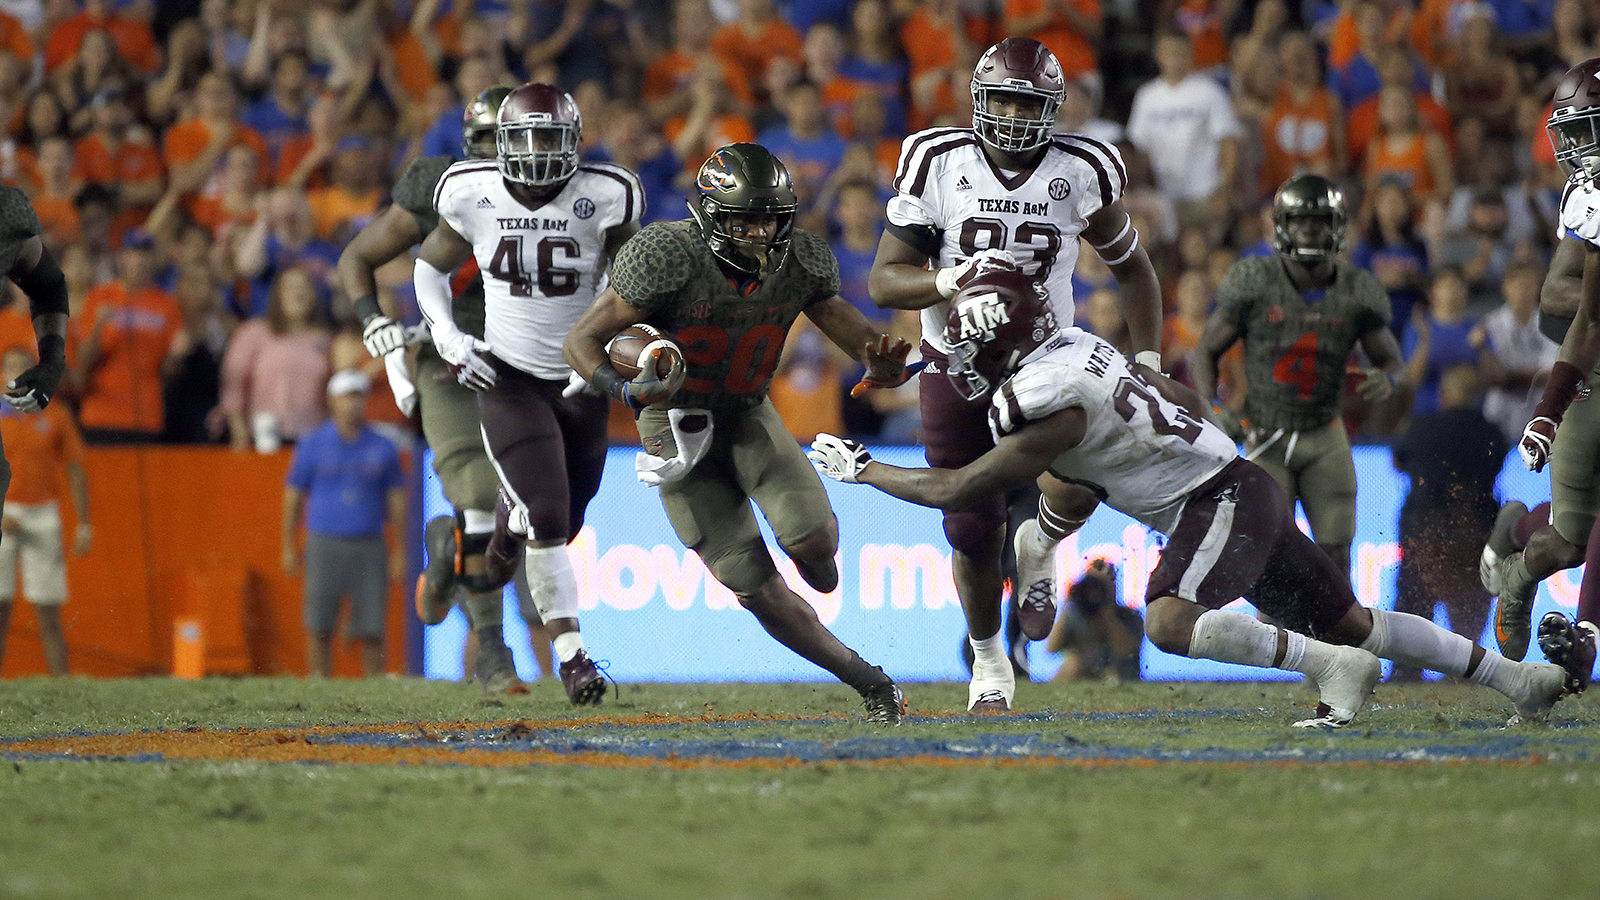 Florida outgains Texas A&M, notches more 1st downs but ends up with loss